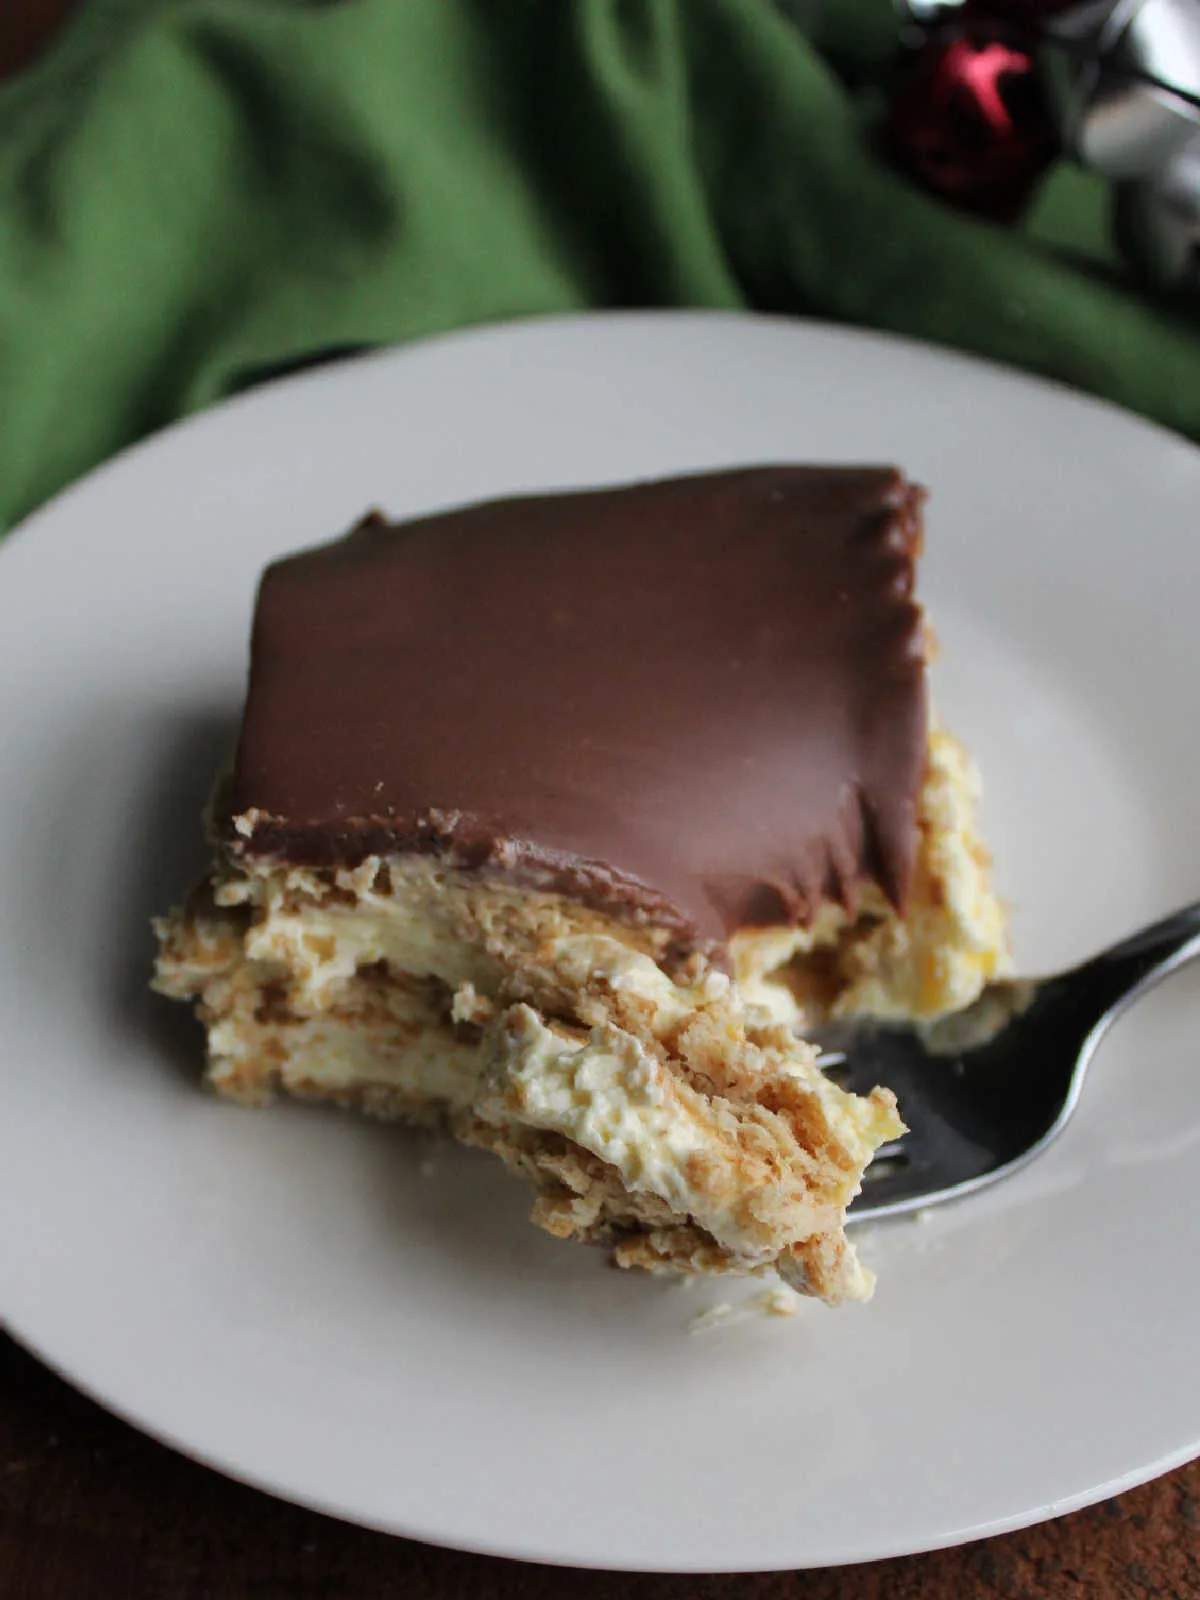 Bite of no bake eclair cake on fork, ready to eat. 